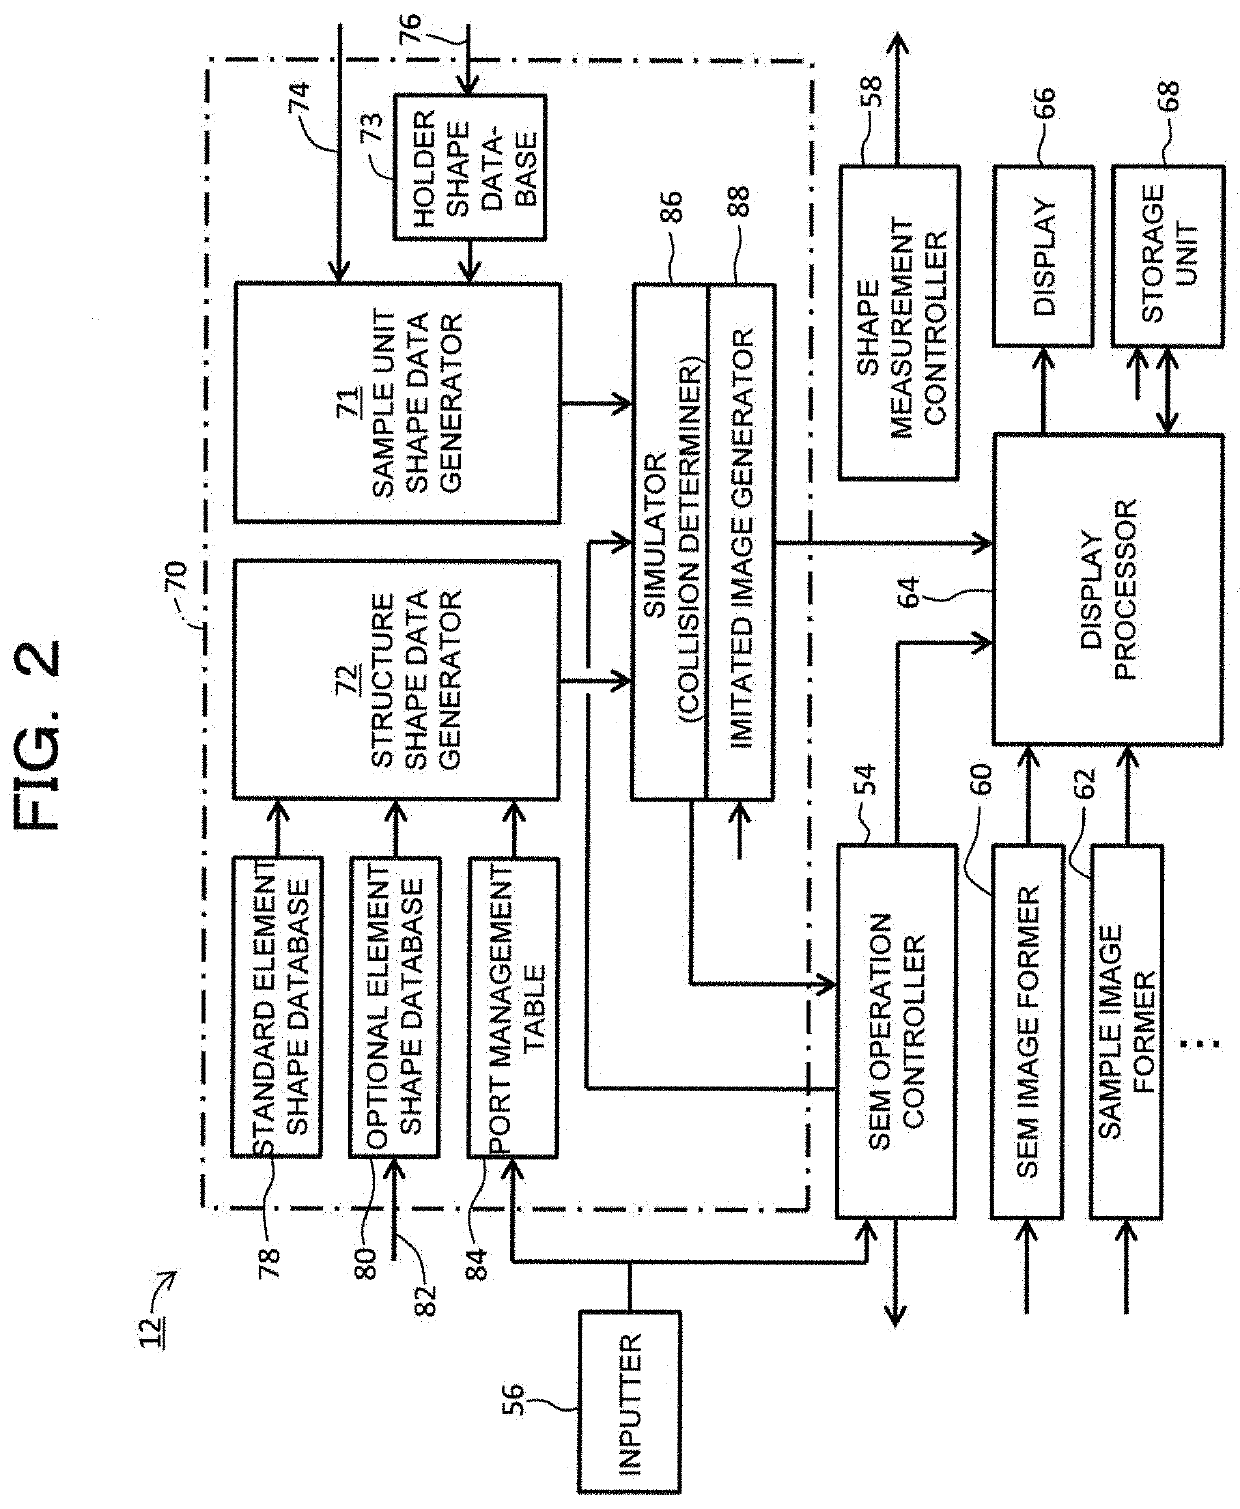 Charged particle beam system and method of measuring sample using scanning eletron microscope